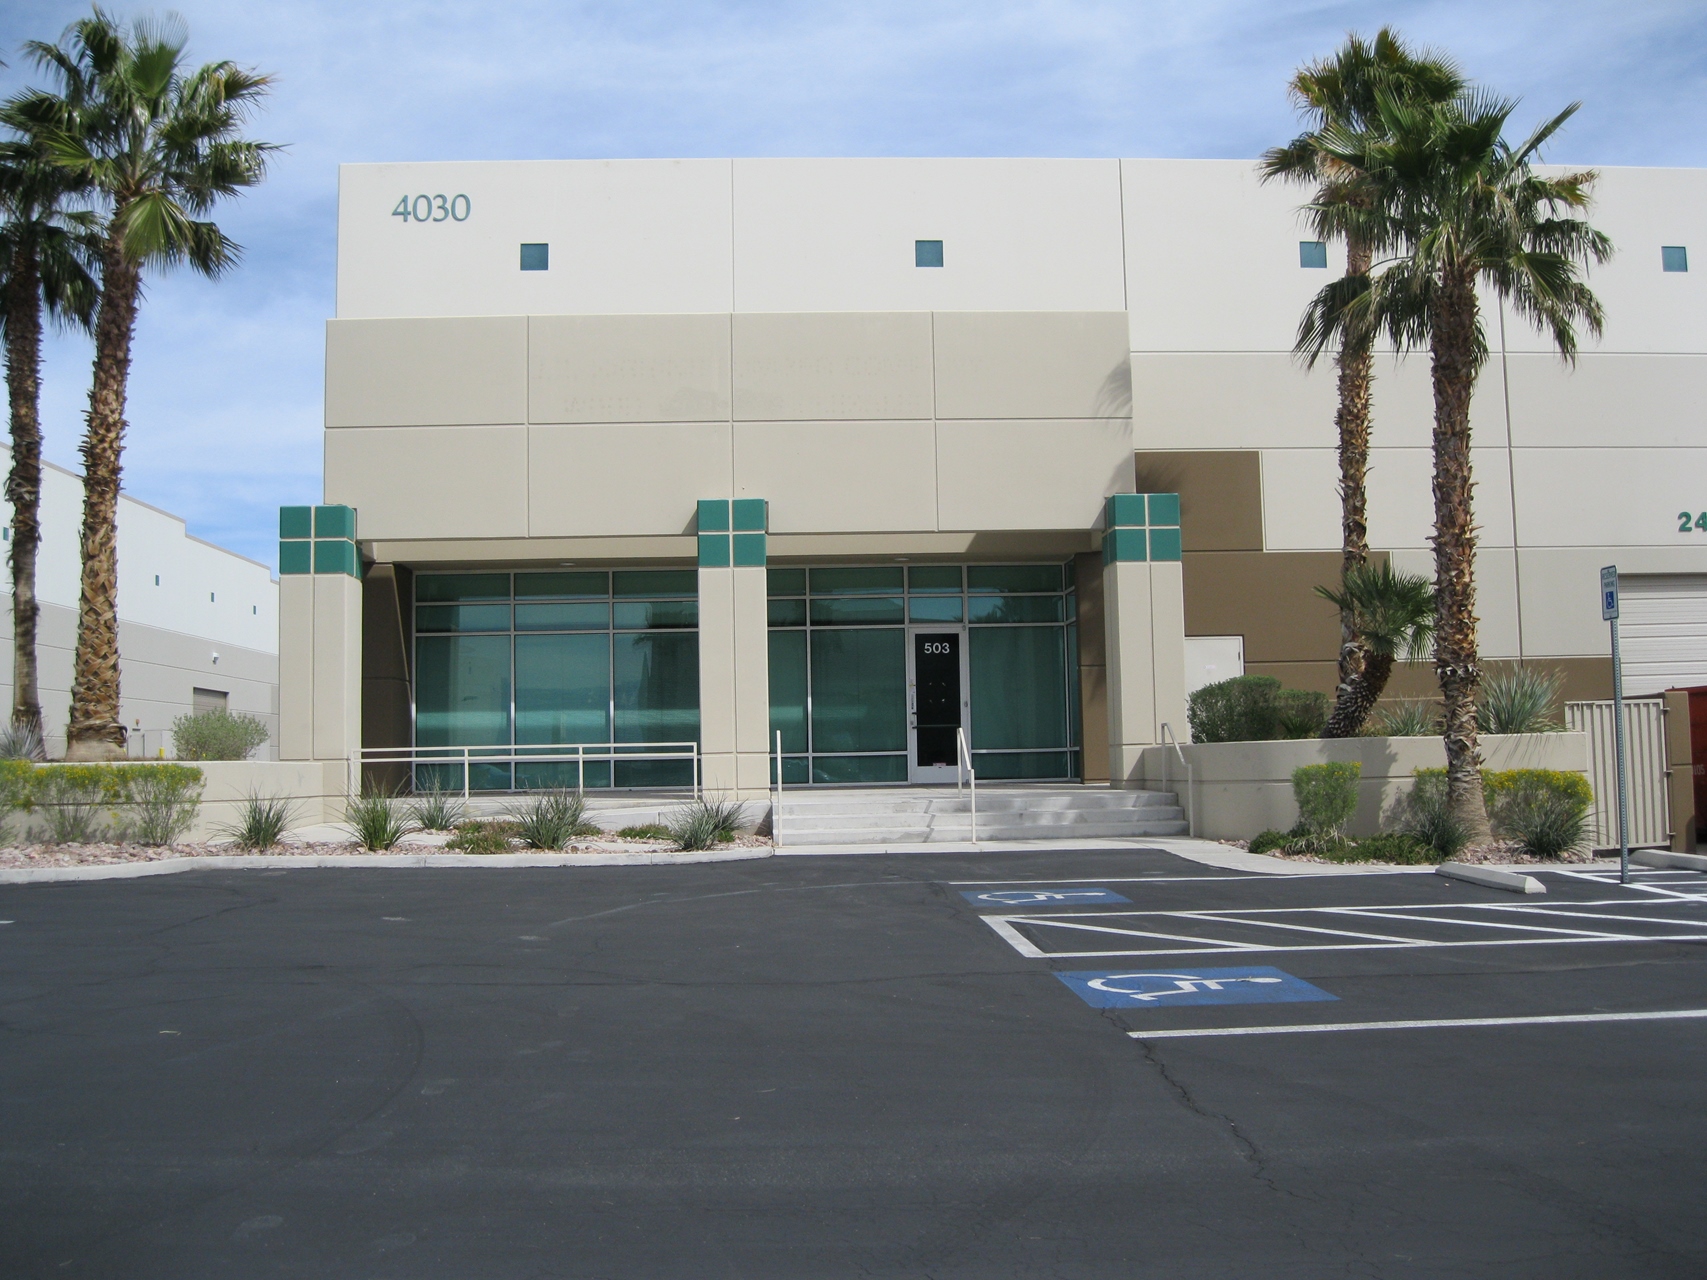 Colliers International – Las Vegas finalized a lease of a 28,800-square-foot industrial property at 4030 Industrial Center Drive in North Las Vegas.